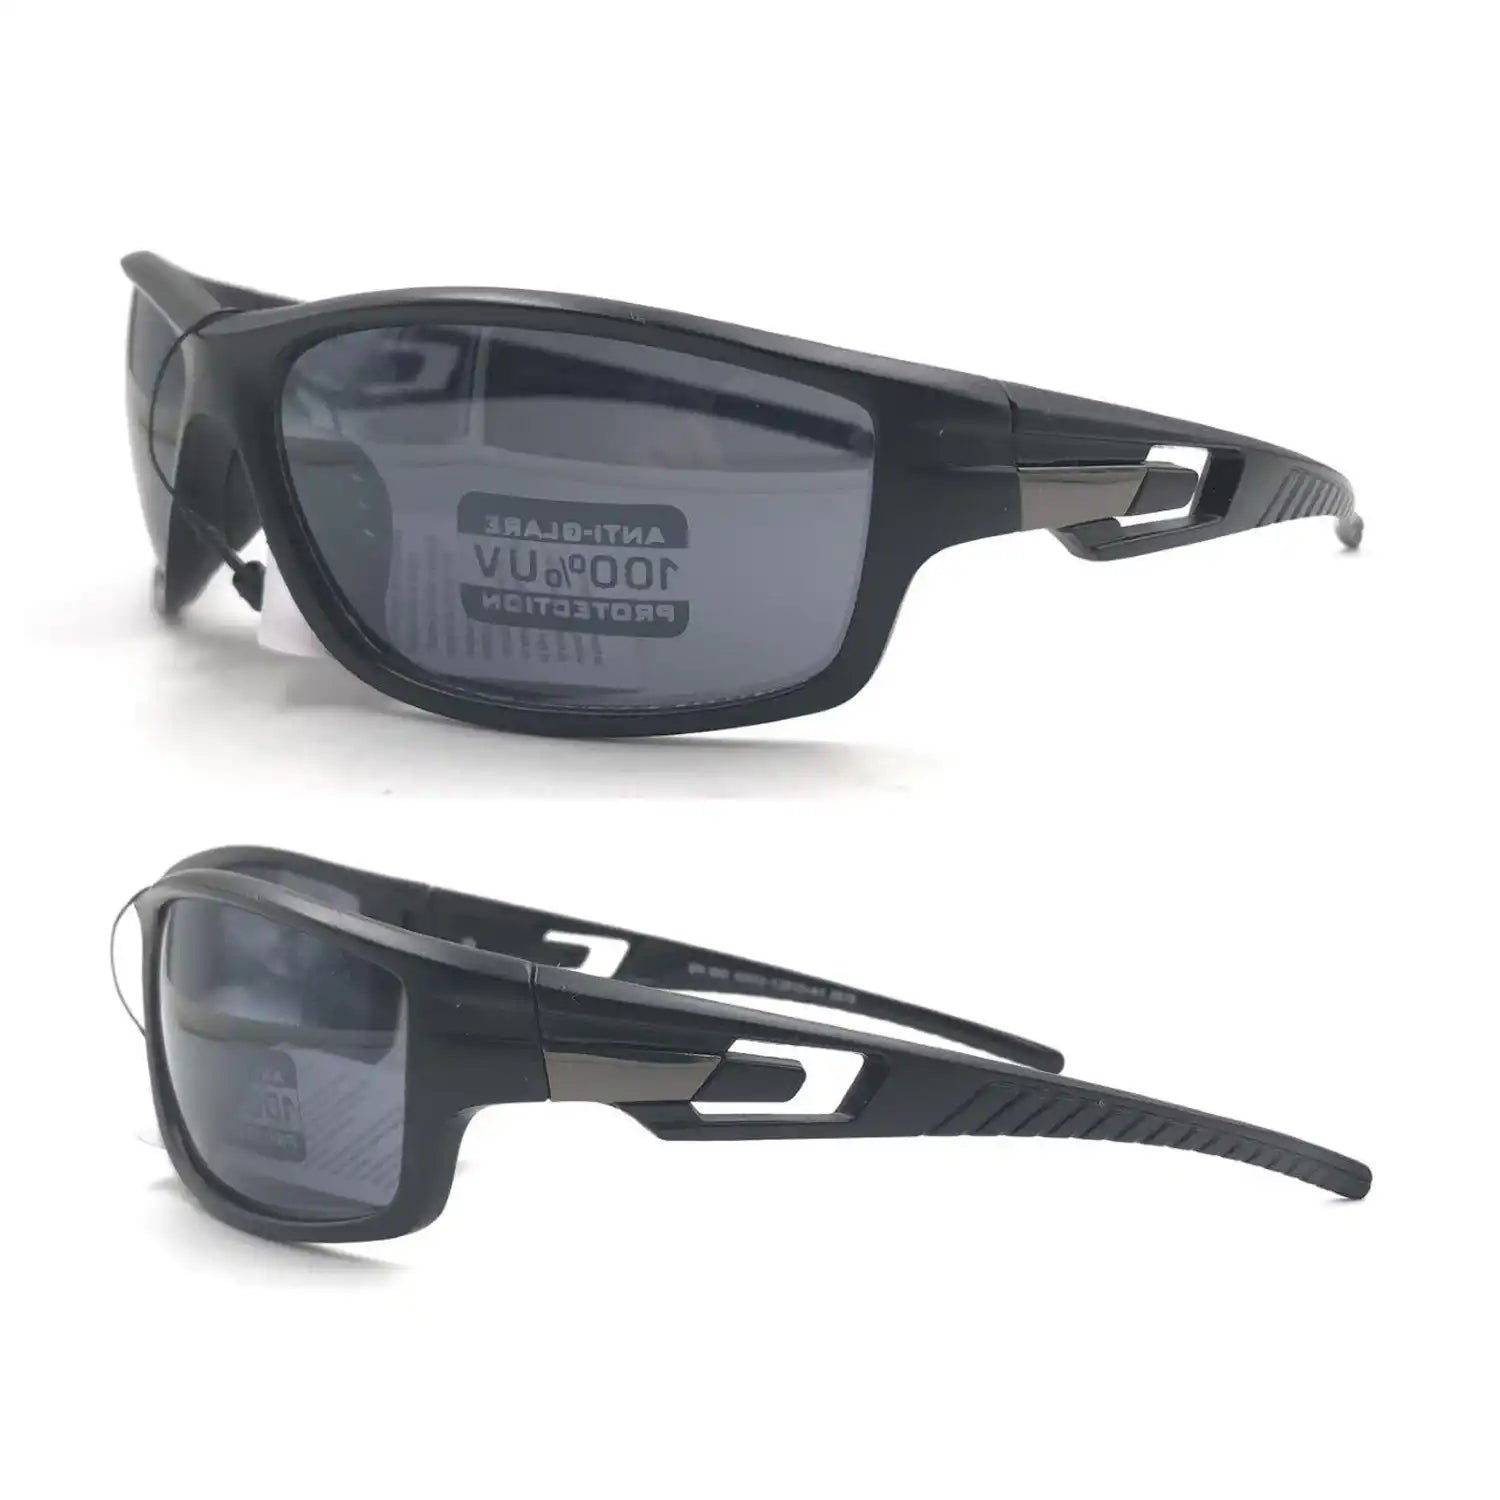 Franco Carducci Shiny Black with Revo Lens 1 Shaws Department Stores